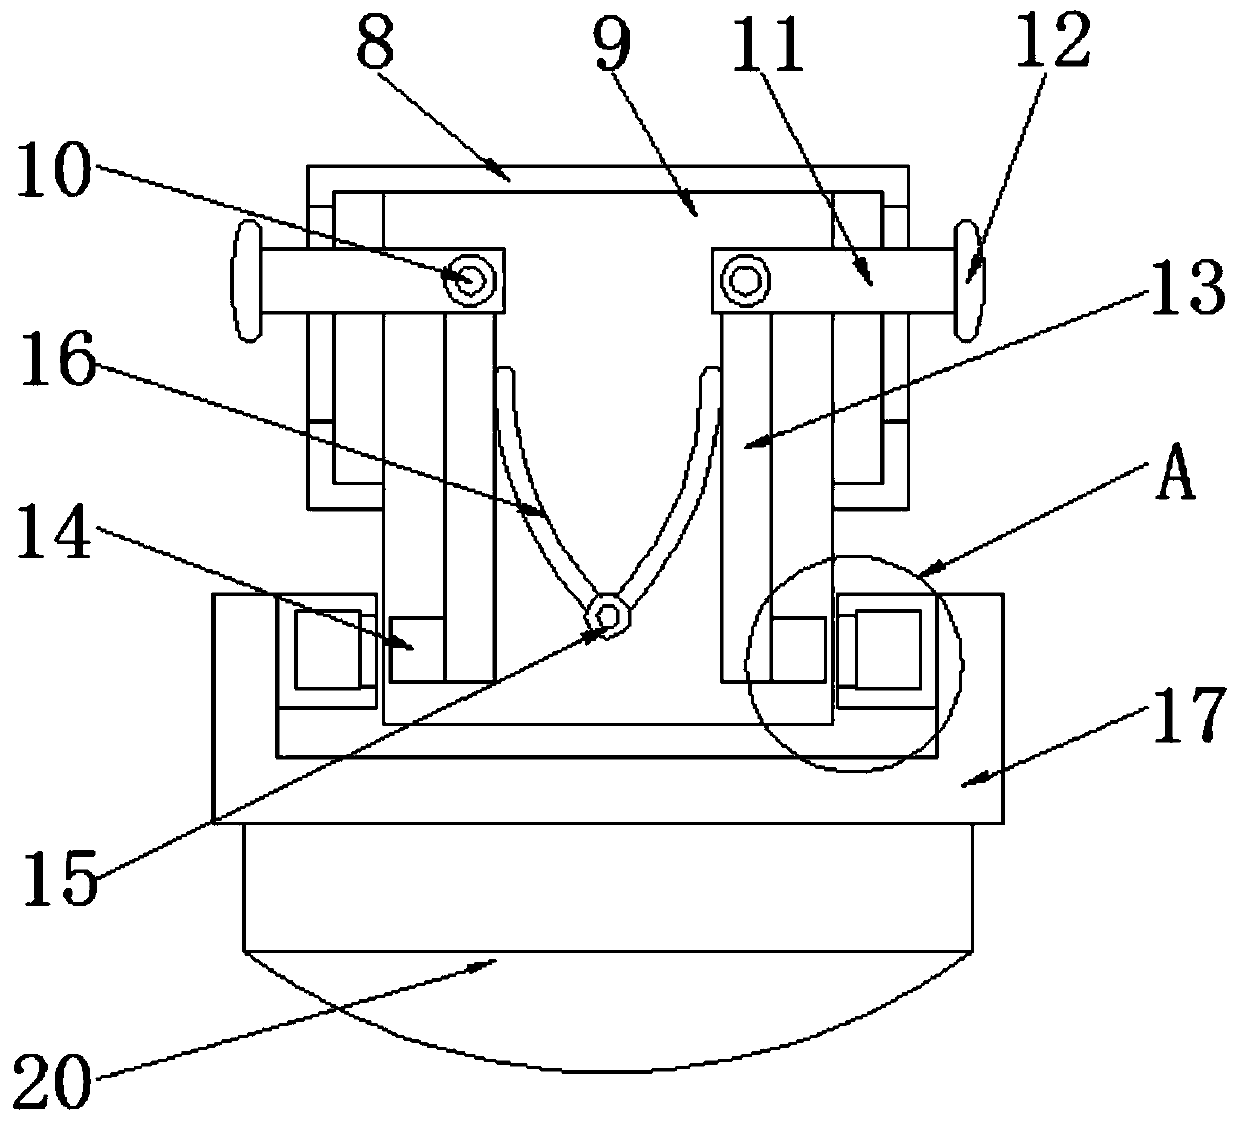 Production equipment and production method